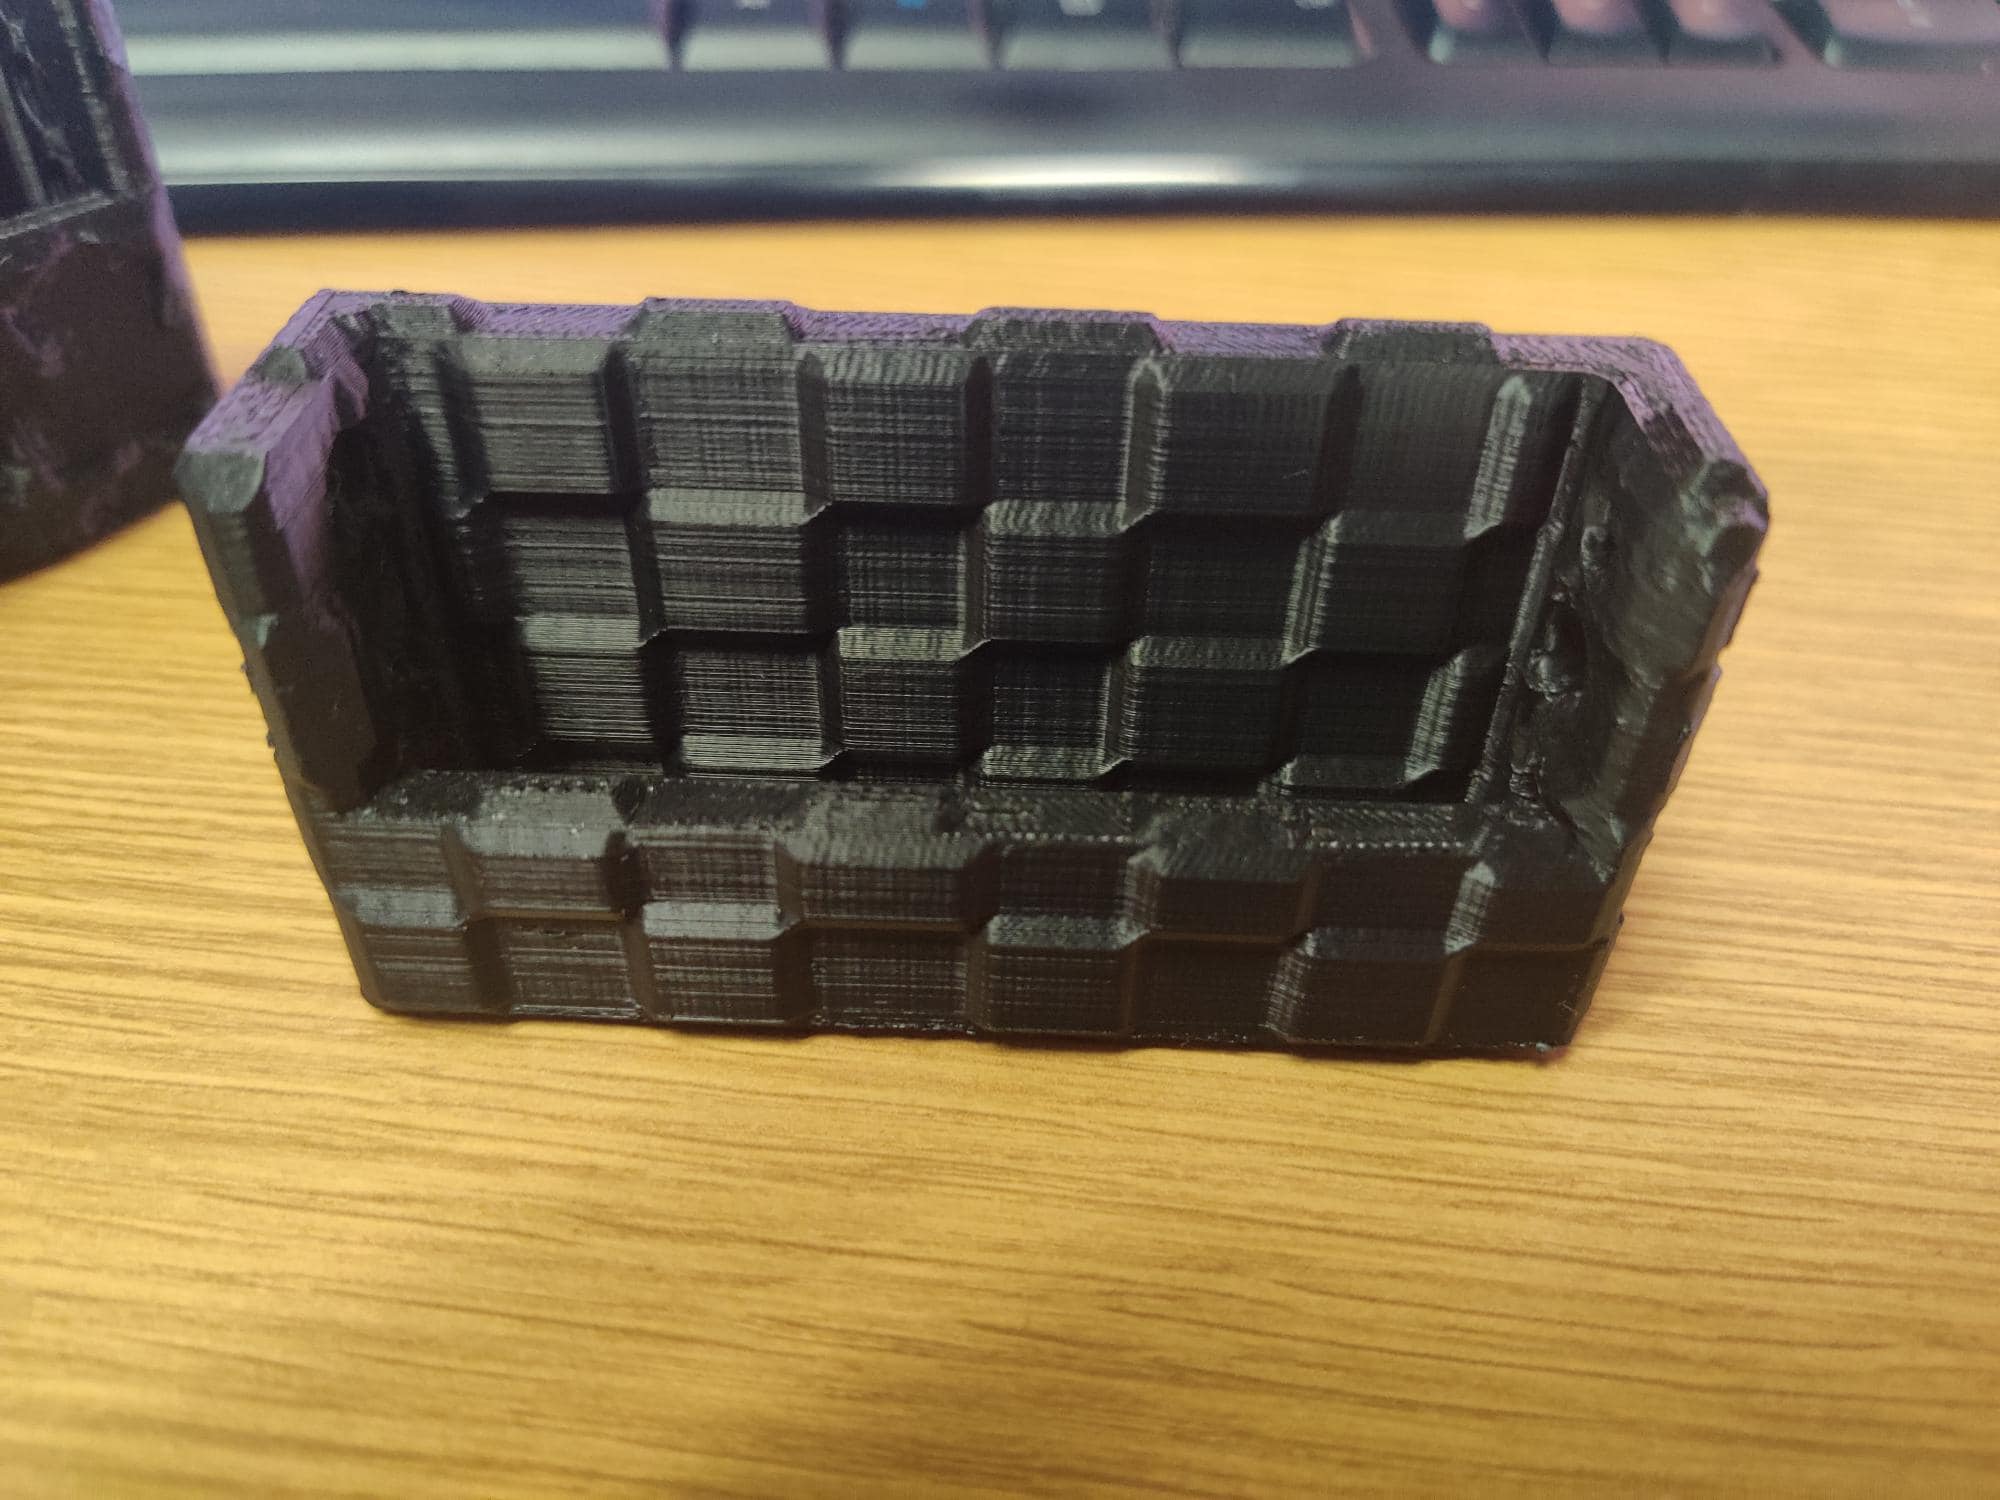 Example of Stratasys FDM part set up to print with a checkerboard surface texture. (Image courtesy PADT Inc.)